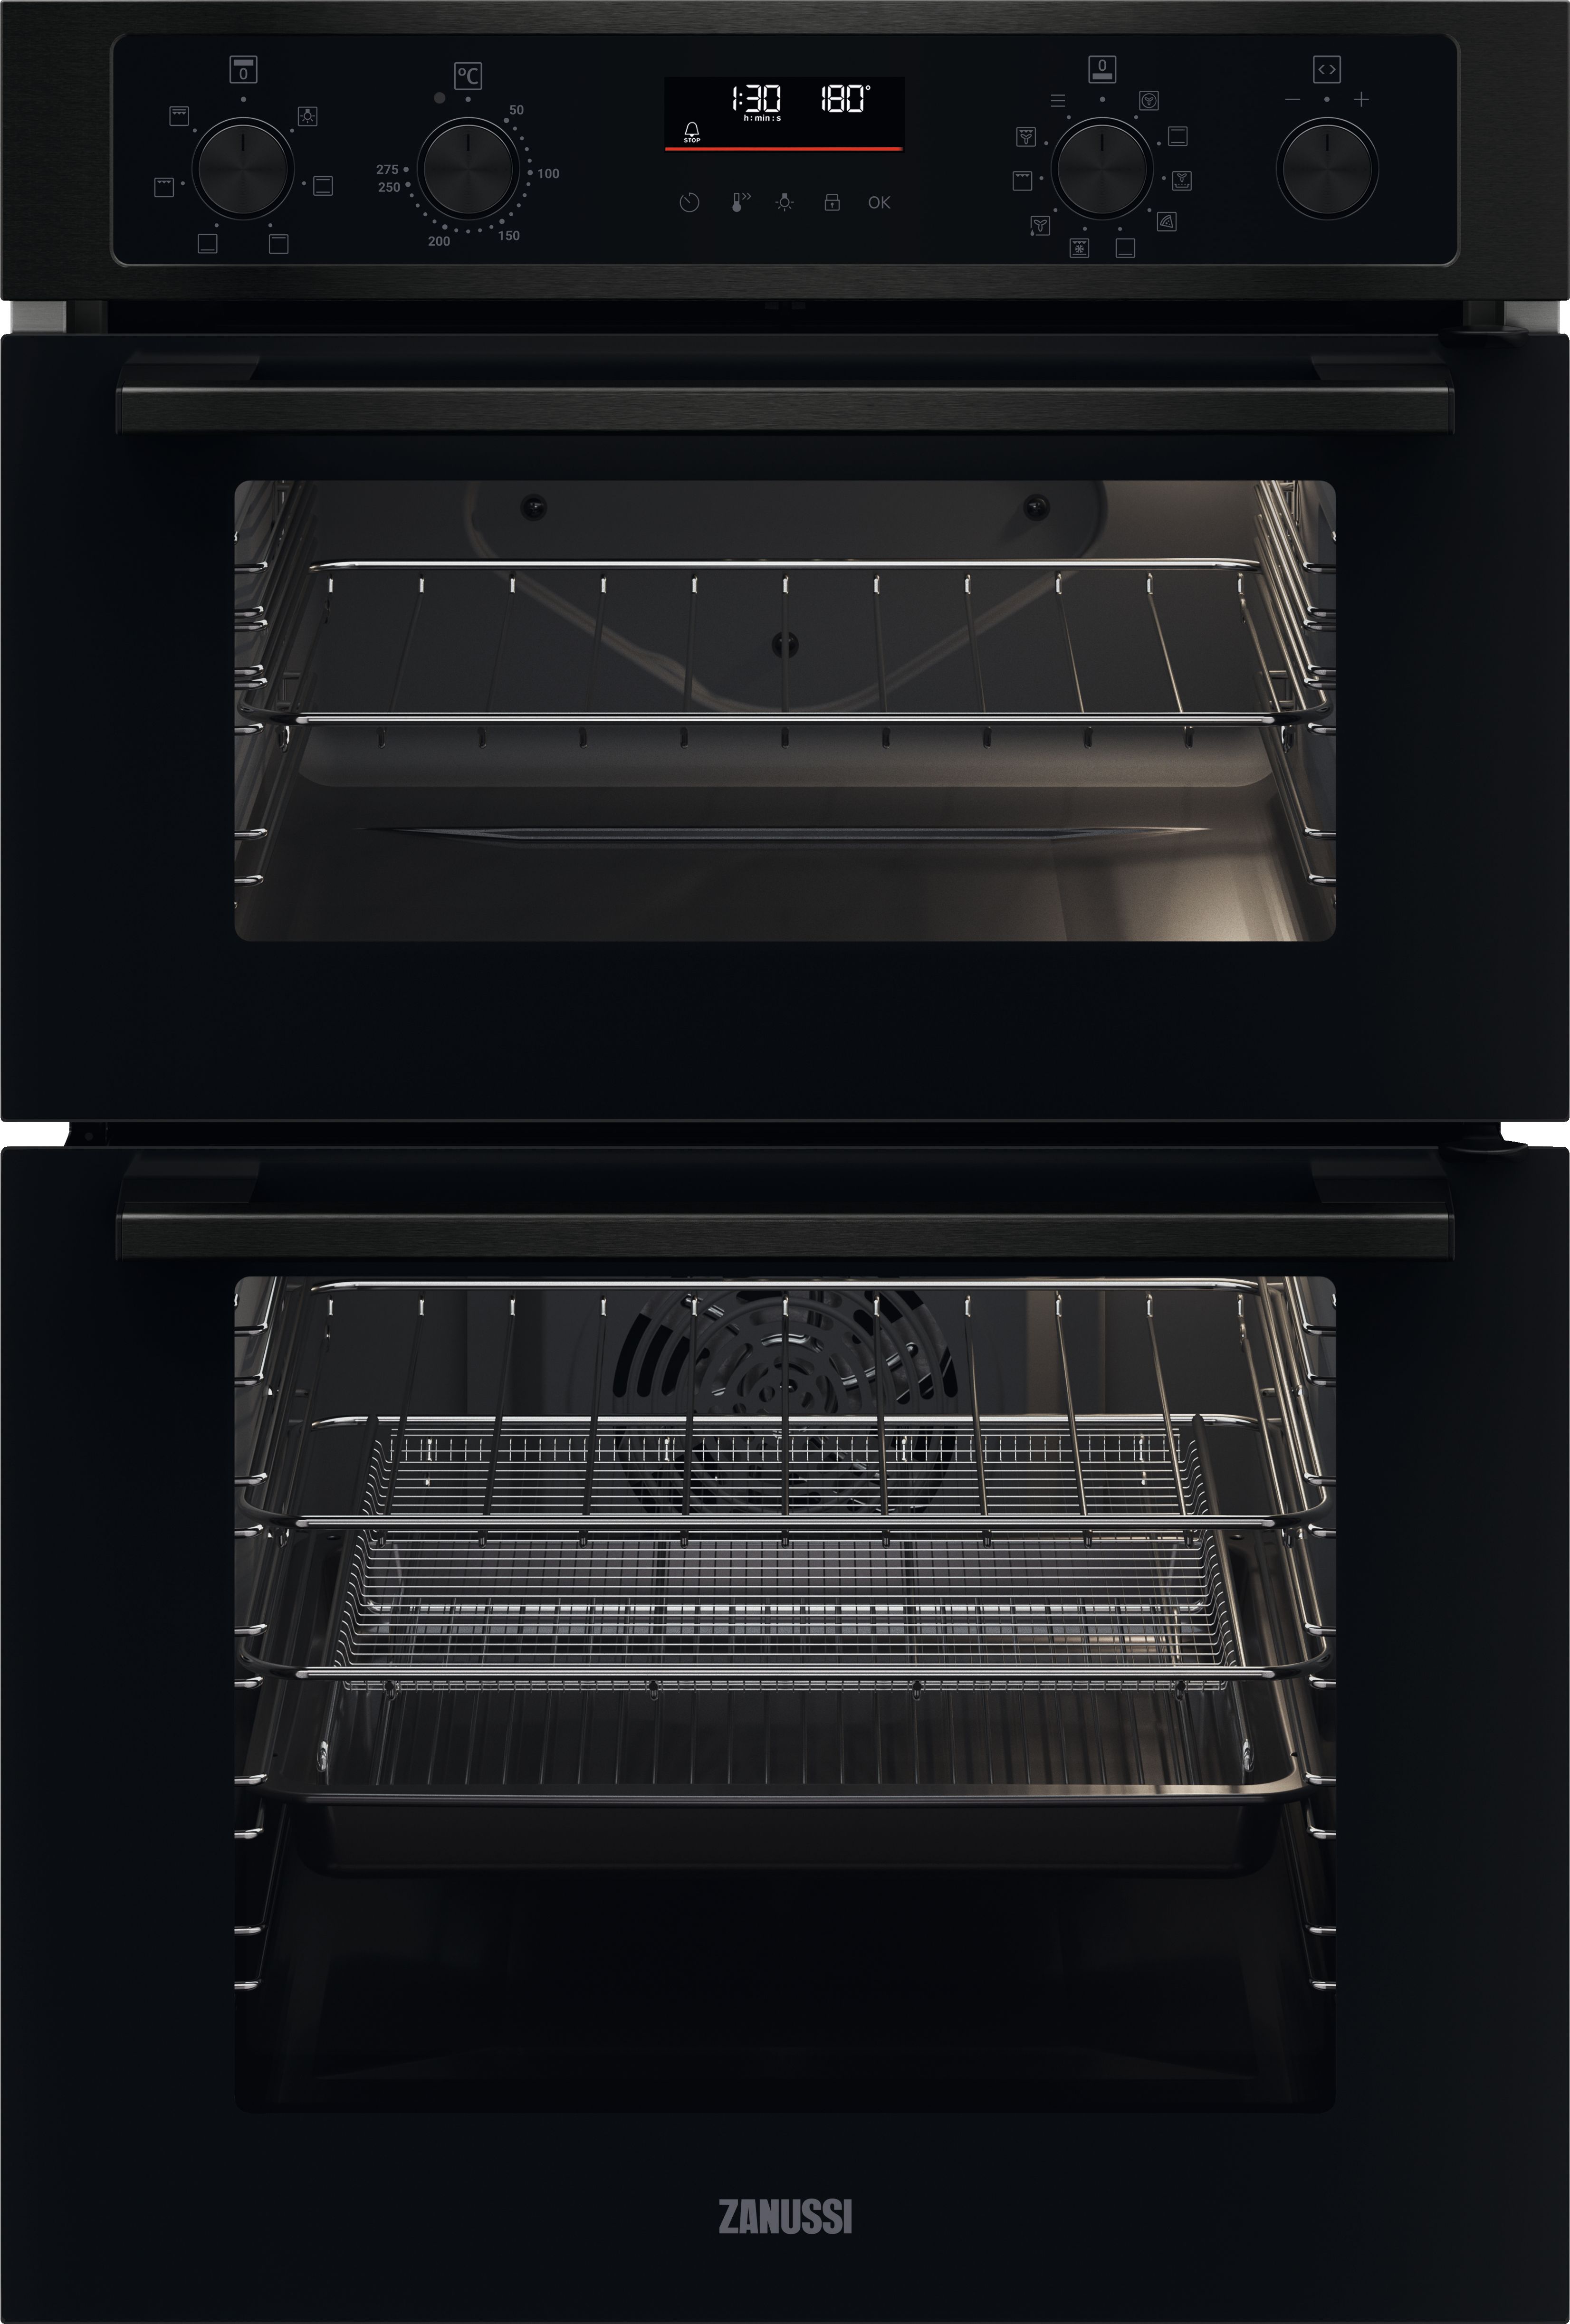 Zanussi Series 40 AirFry ZKCNA7KN Built In Electric Double Oven - Black - A Rated, Black